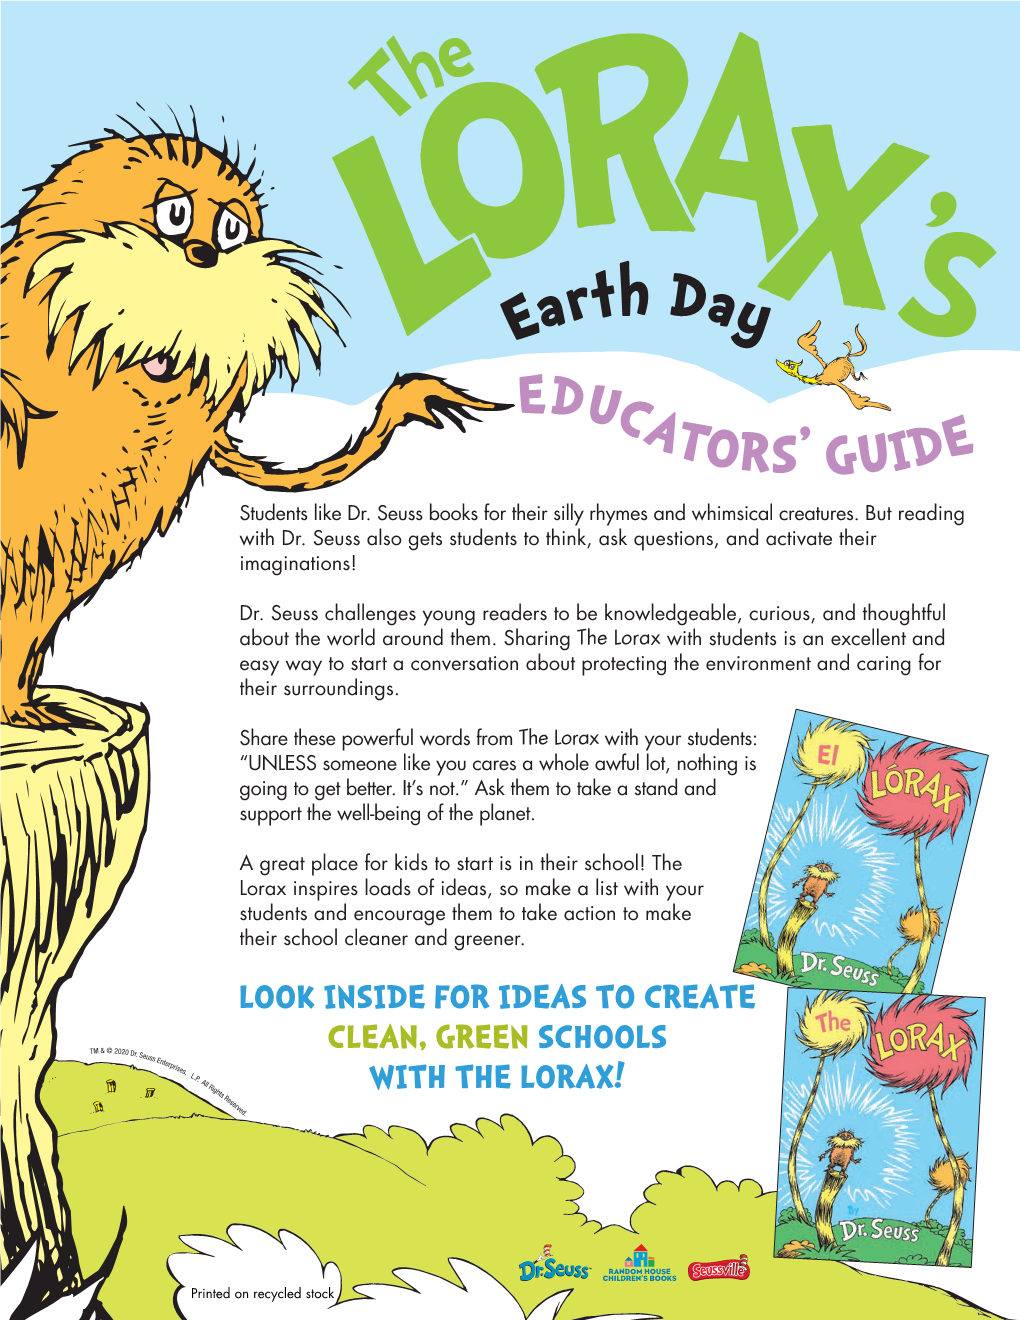 The Lorax's 50Th Anniversary Earth Day Educator Guide